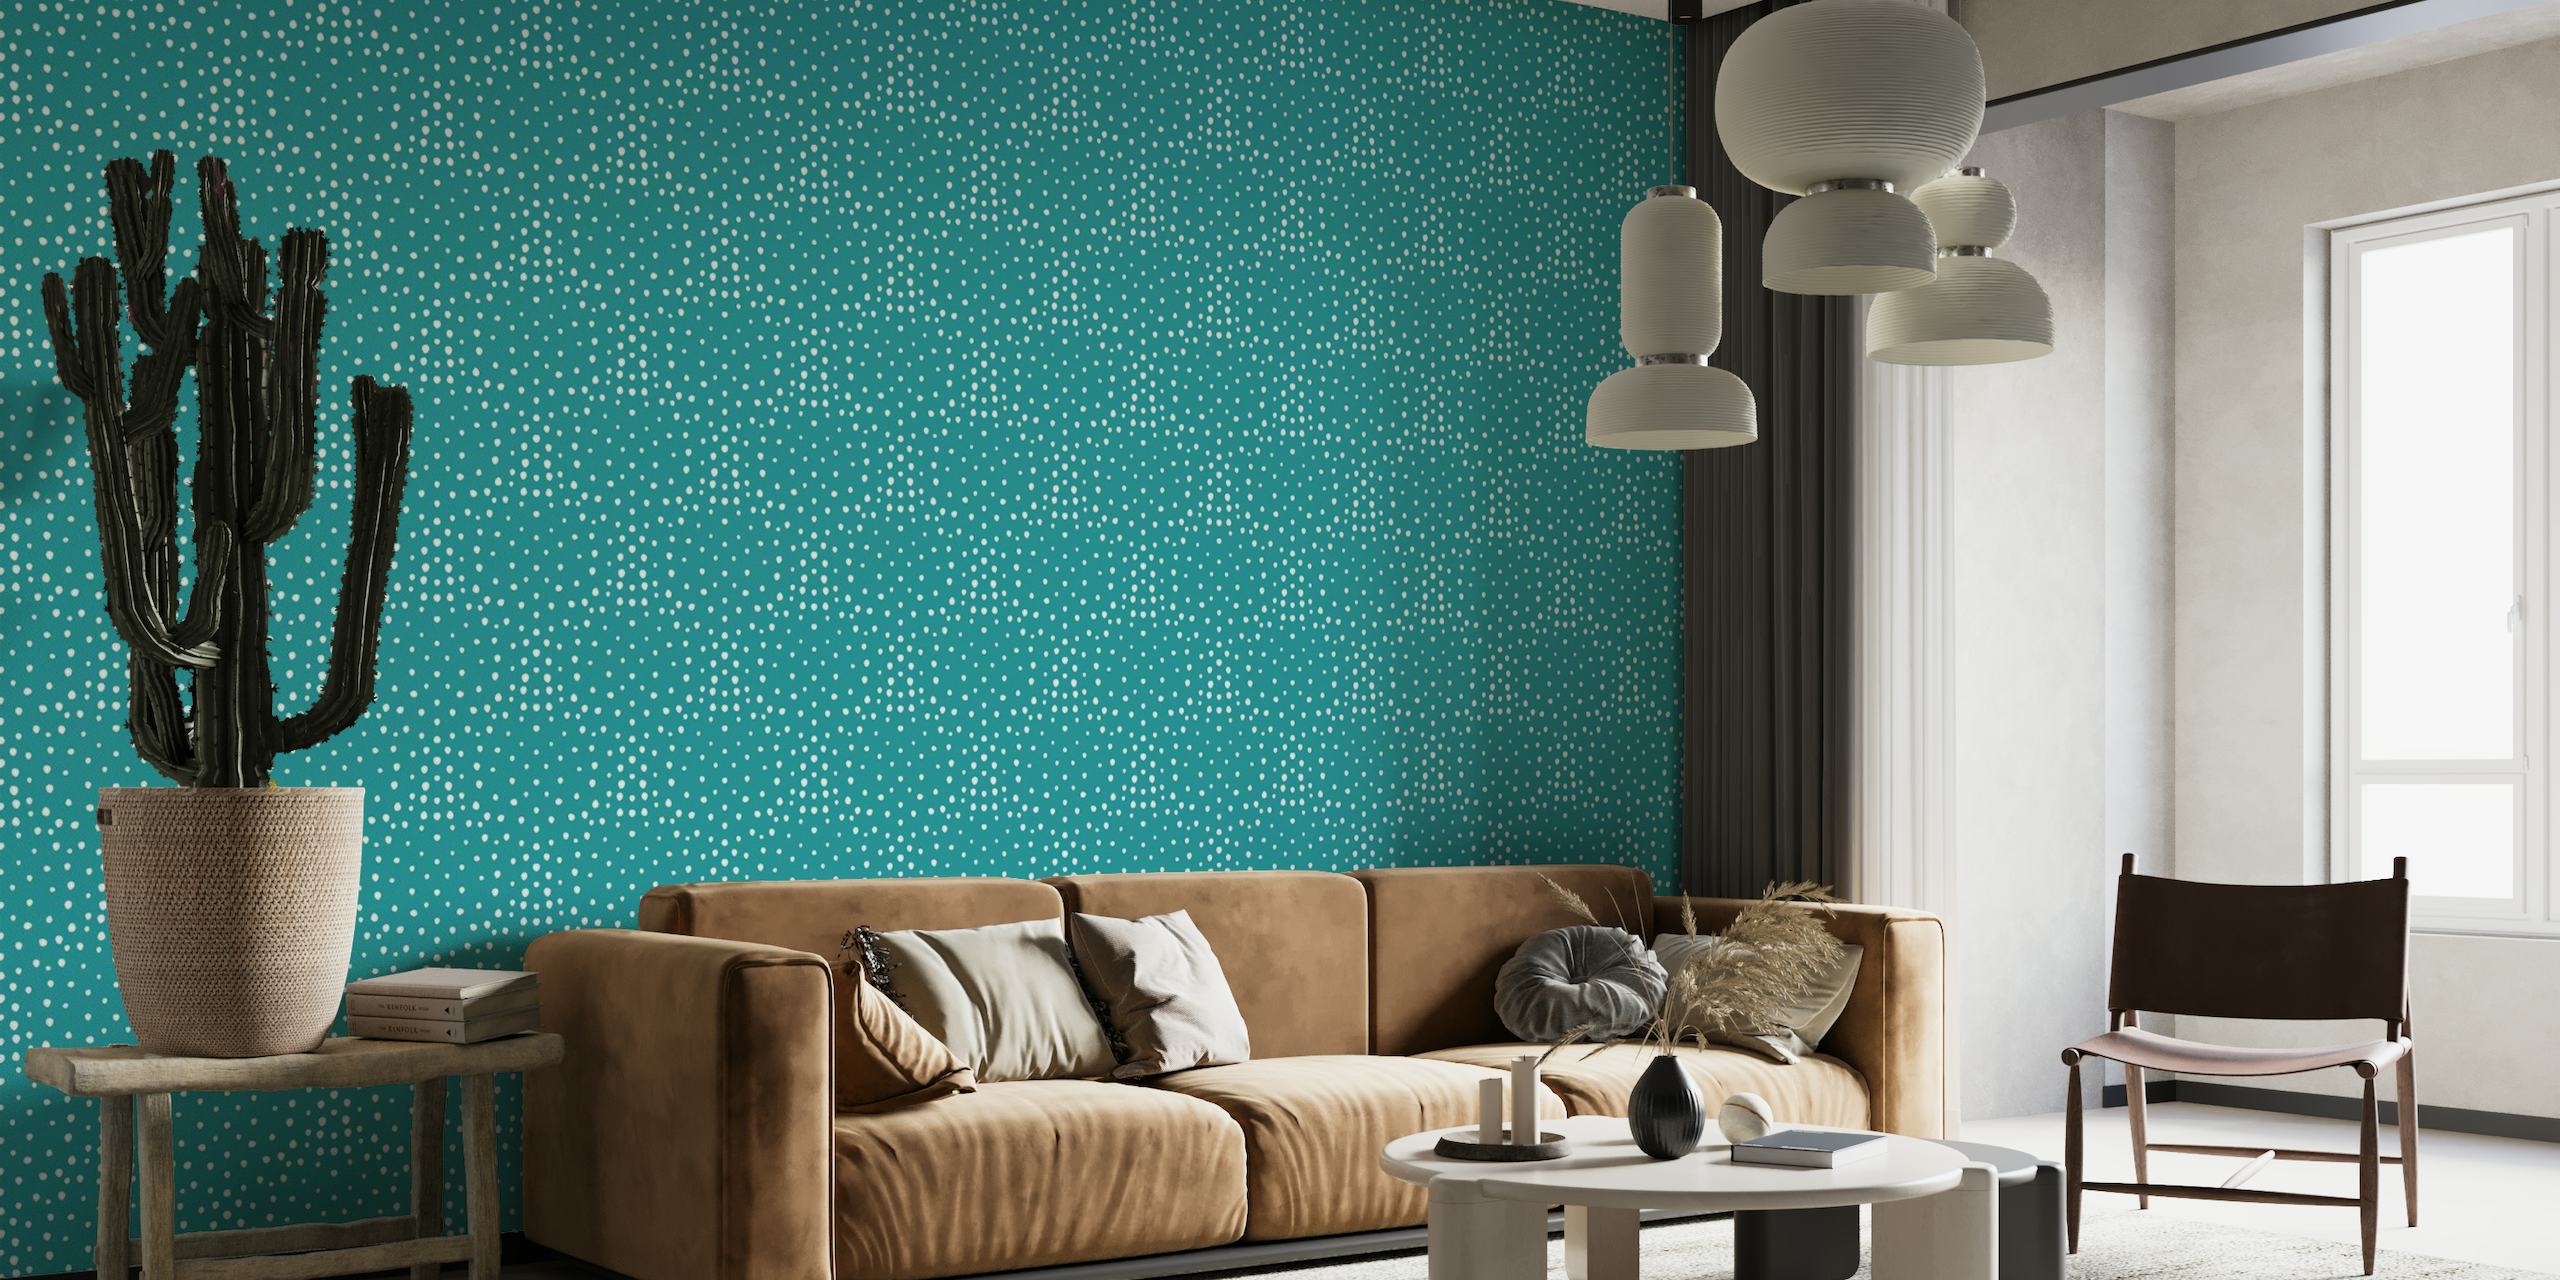 Turquoise Tranquility: Abstract Dots Blender Design - GD23-A17 ταπετσαρία